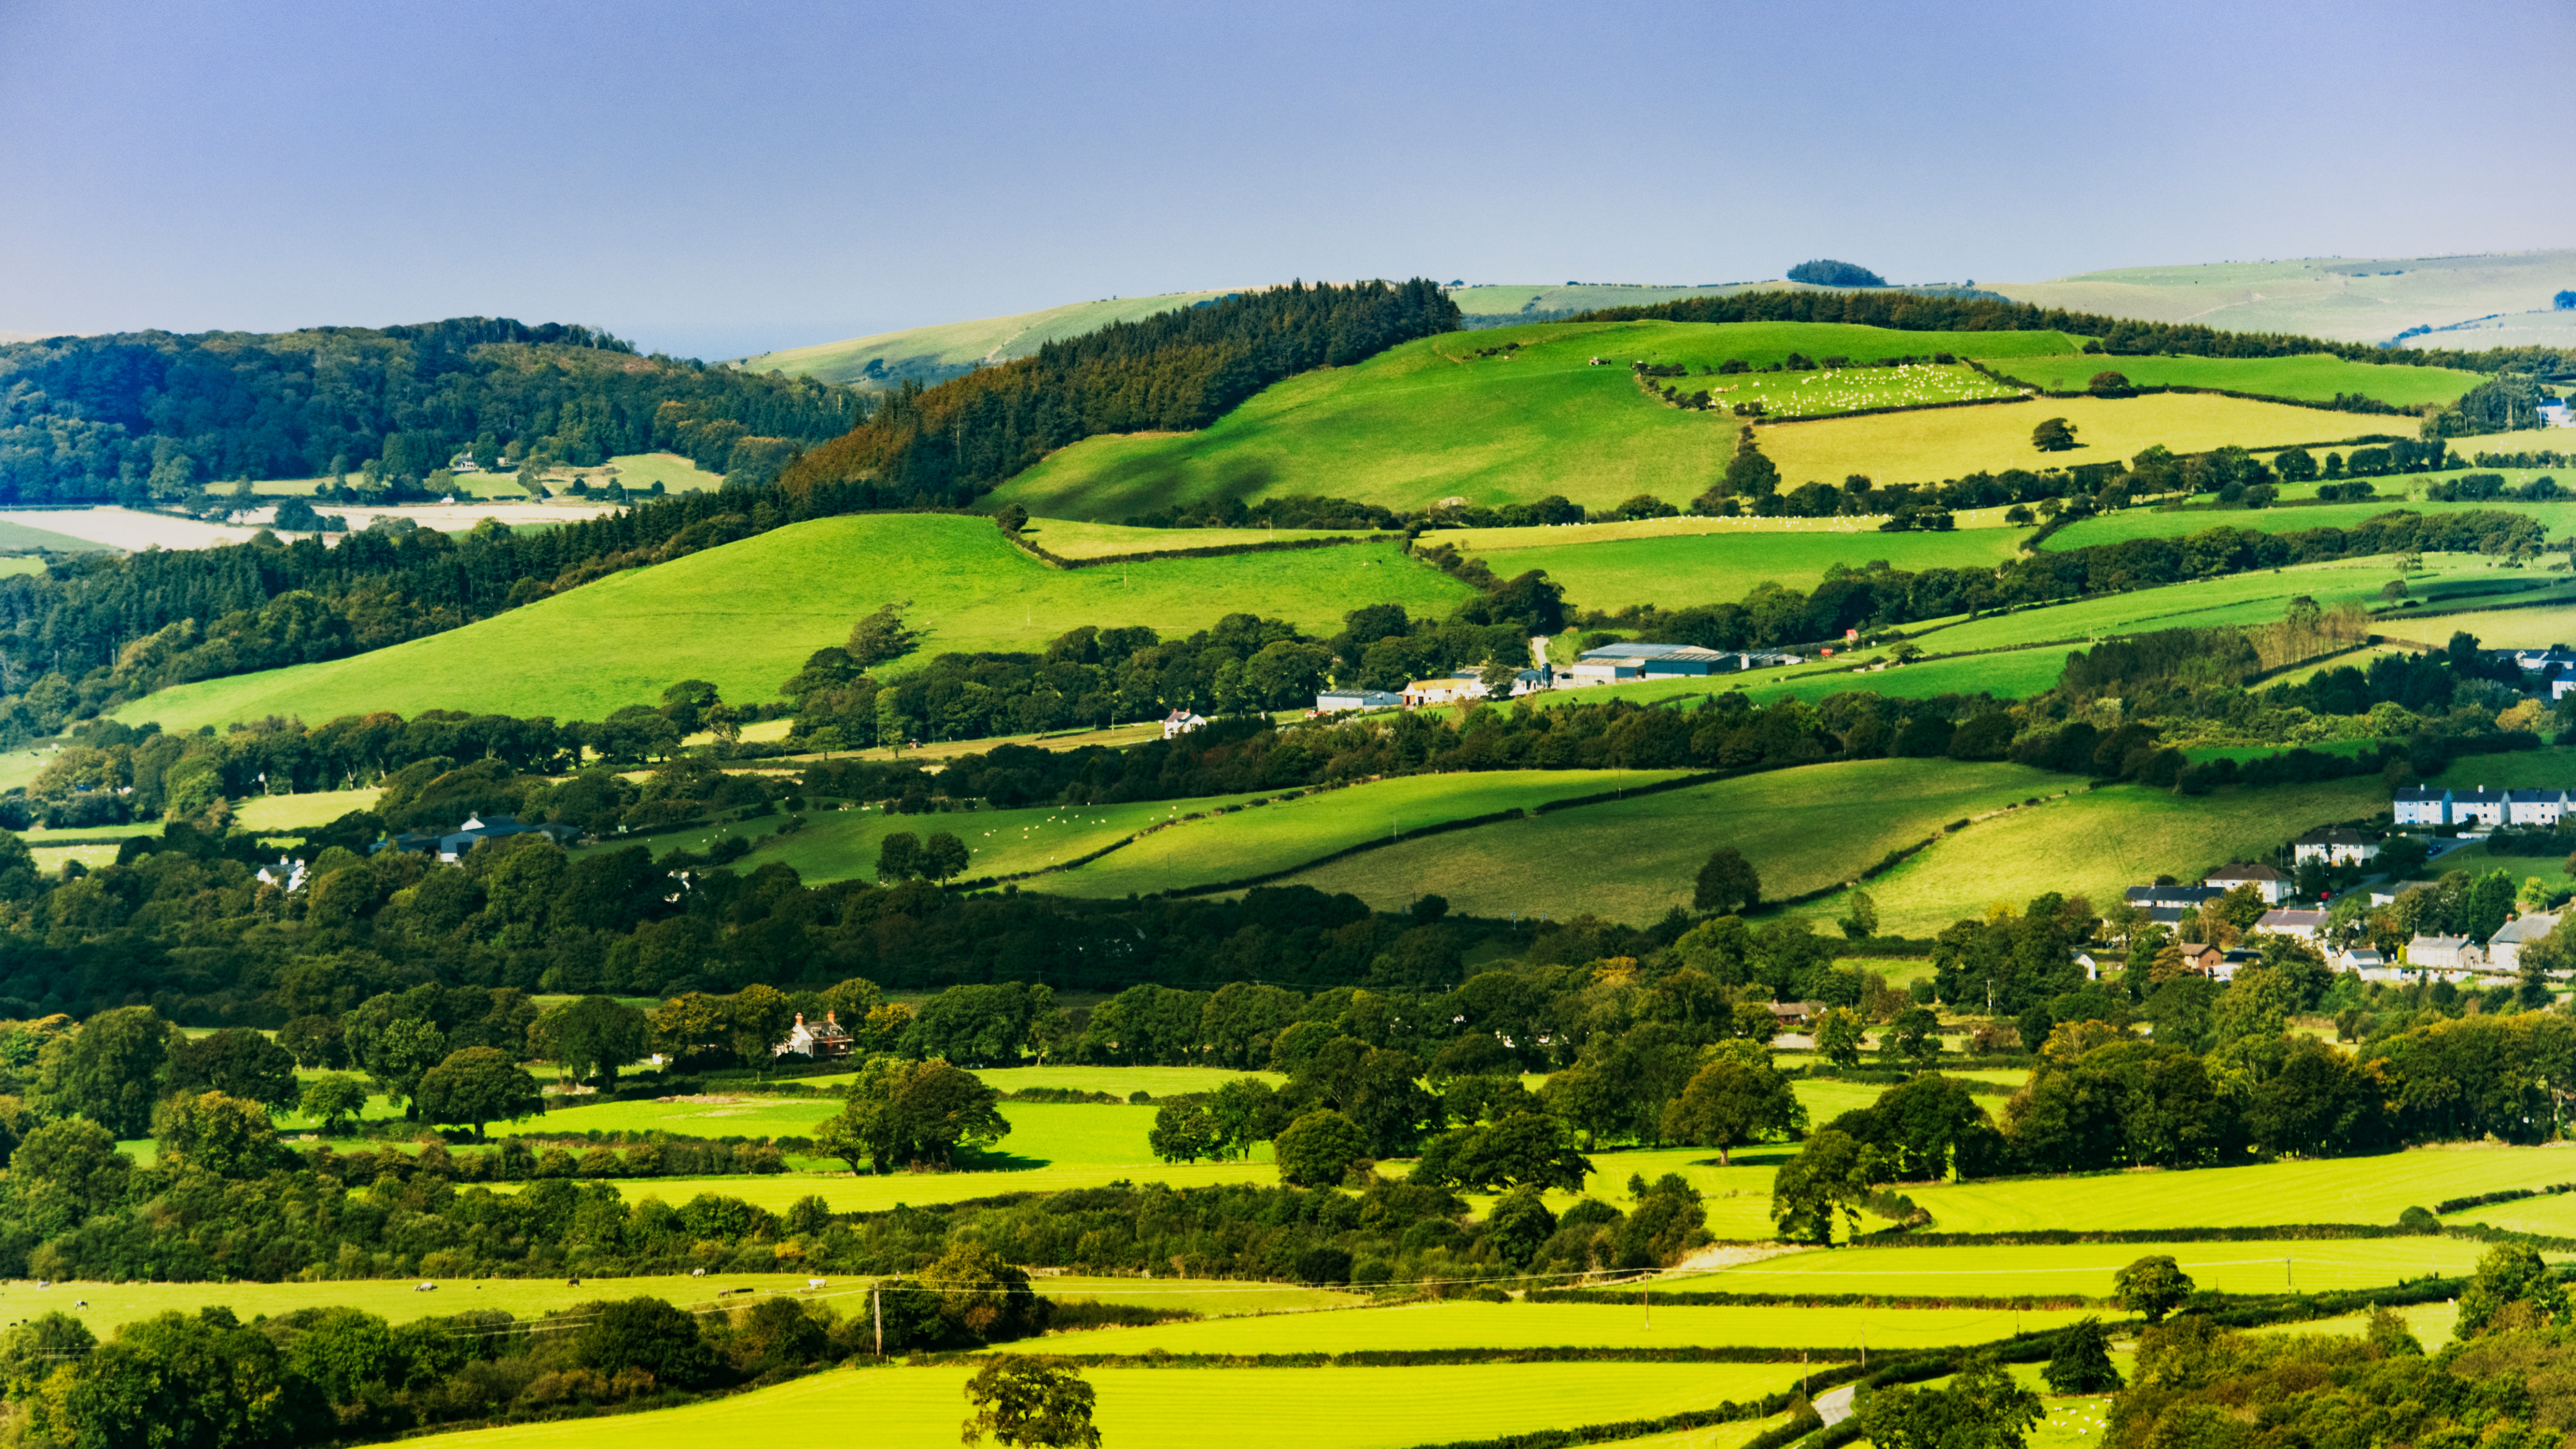 A hill that has many fields lined with trees, with sheep and houses scattered amongst the countryside.